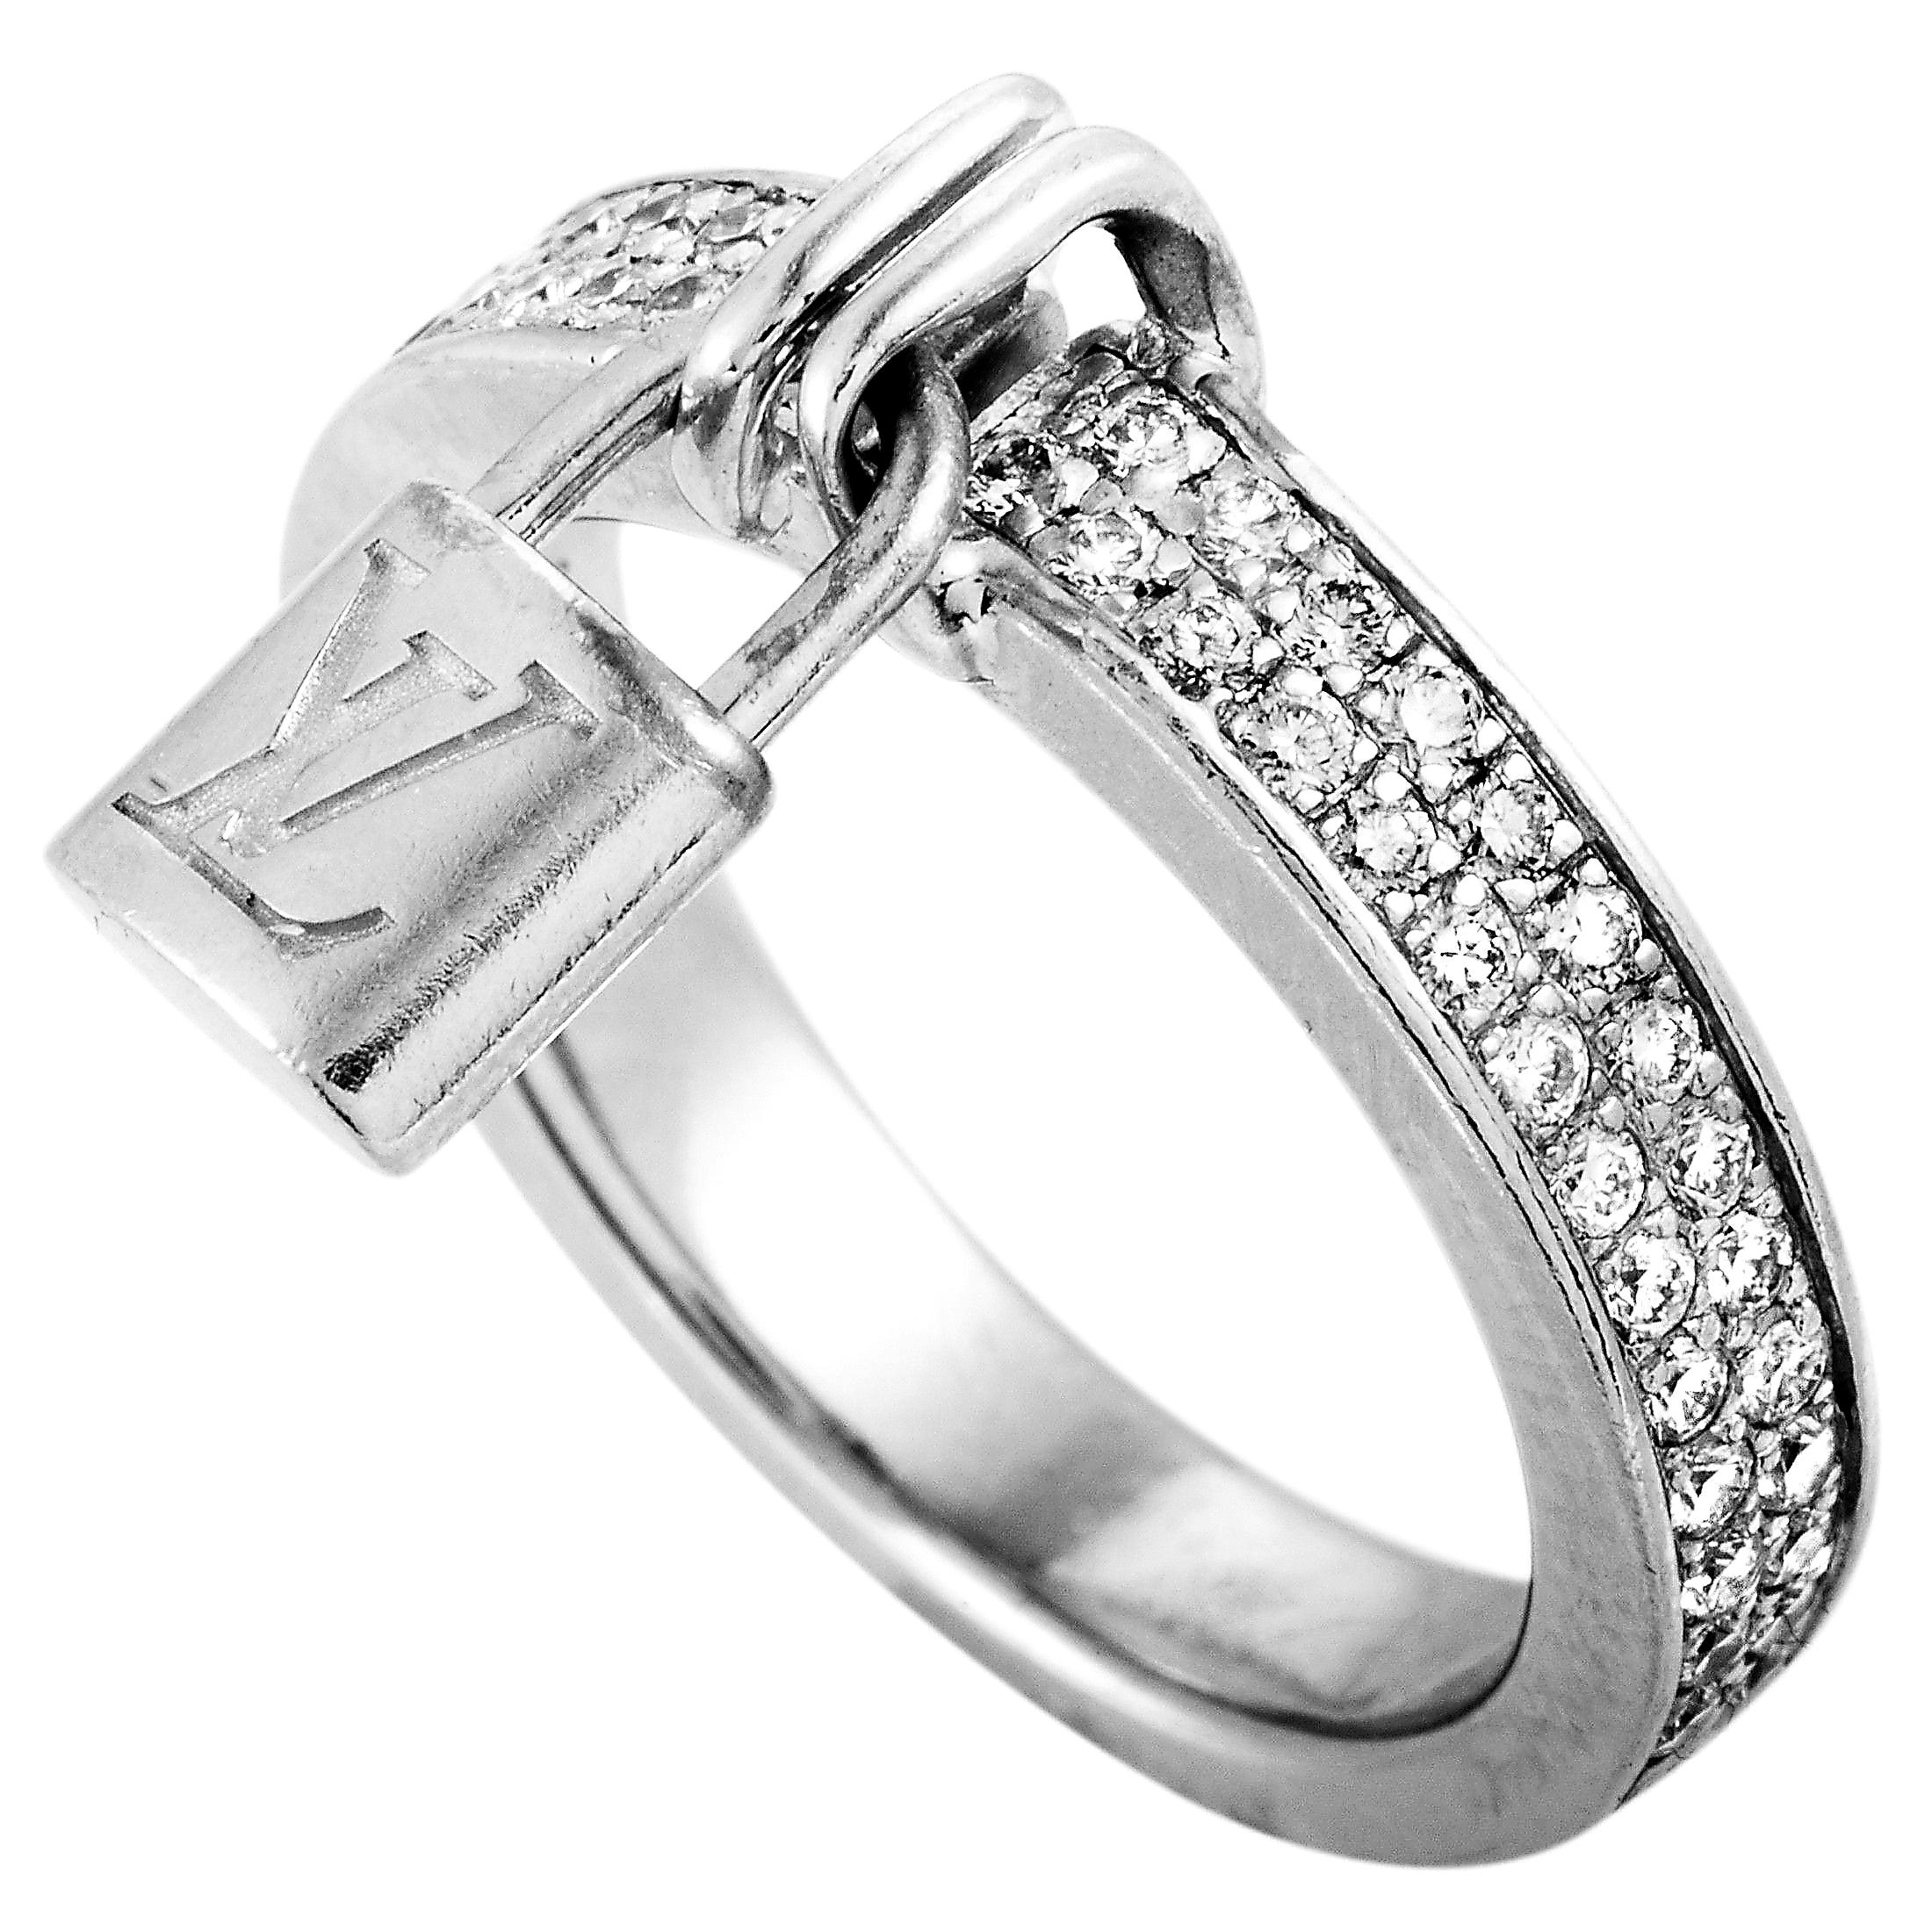 Louis Vuitton Lockit Ring - For Sale on 1stDibs